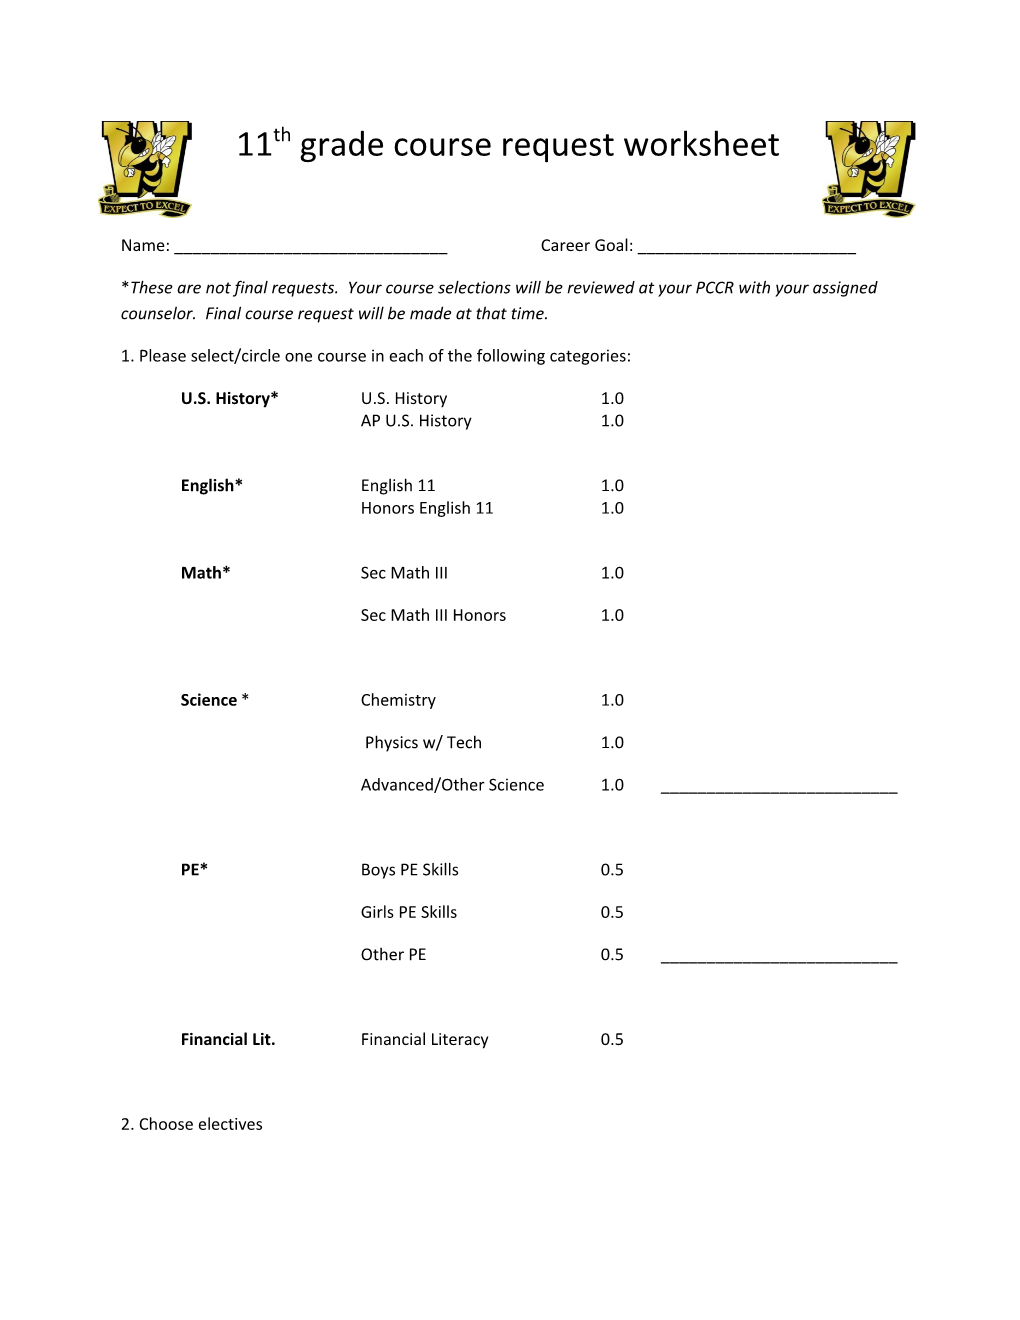 11Th Grade Course Request Worksheet